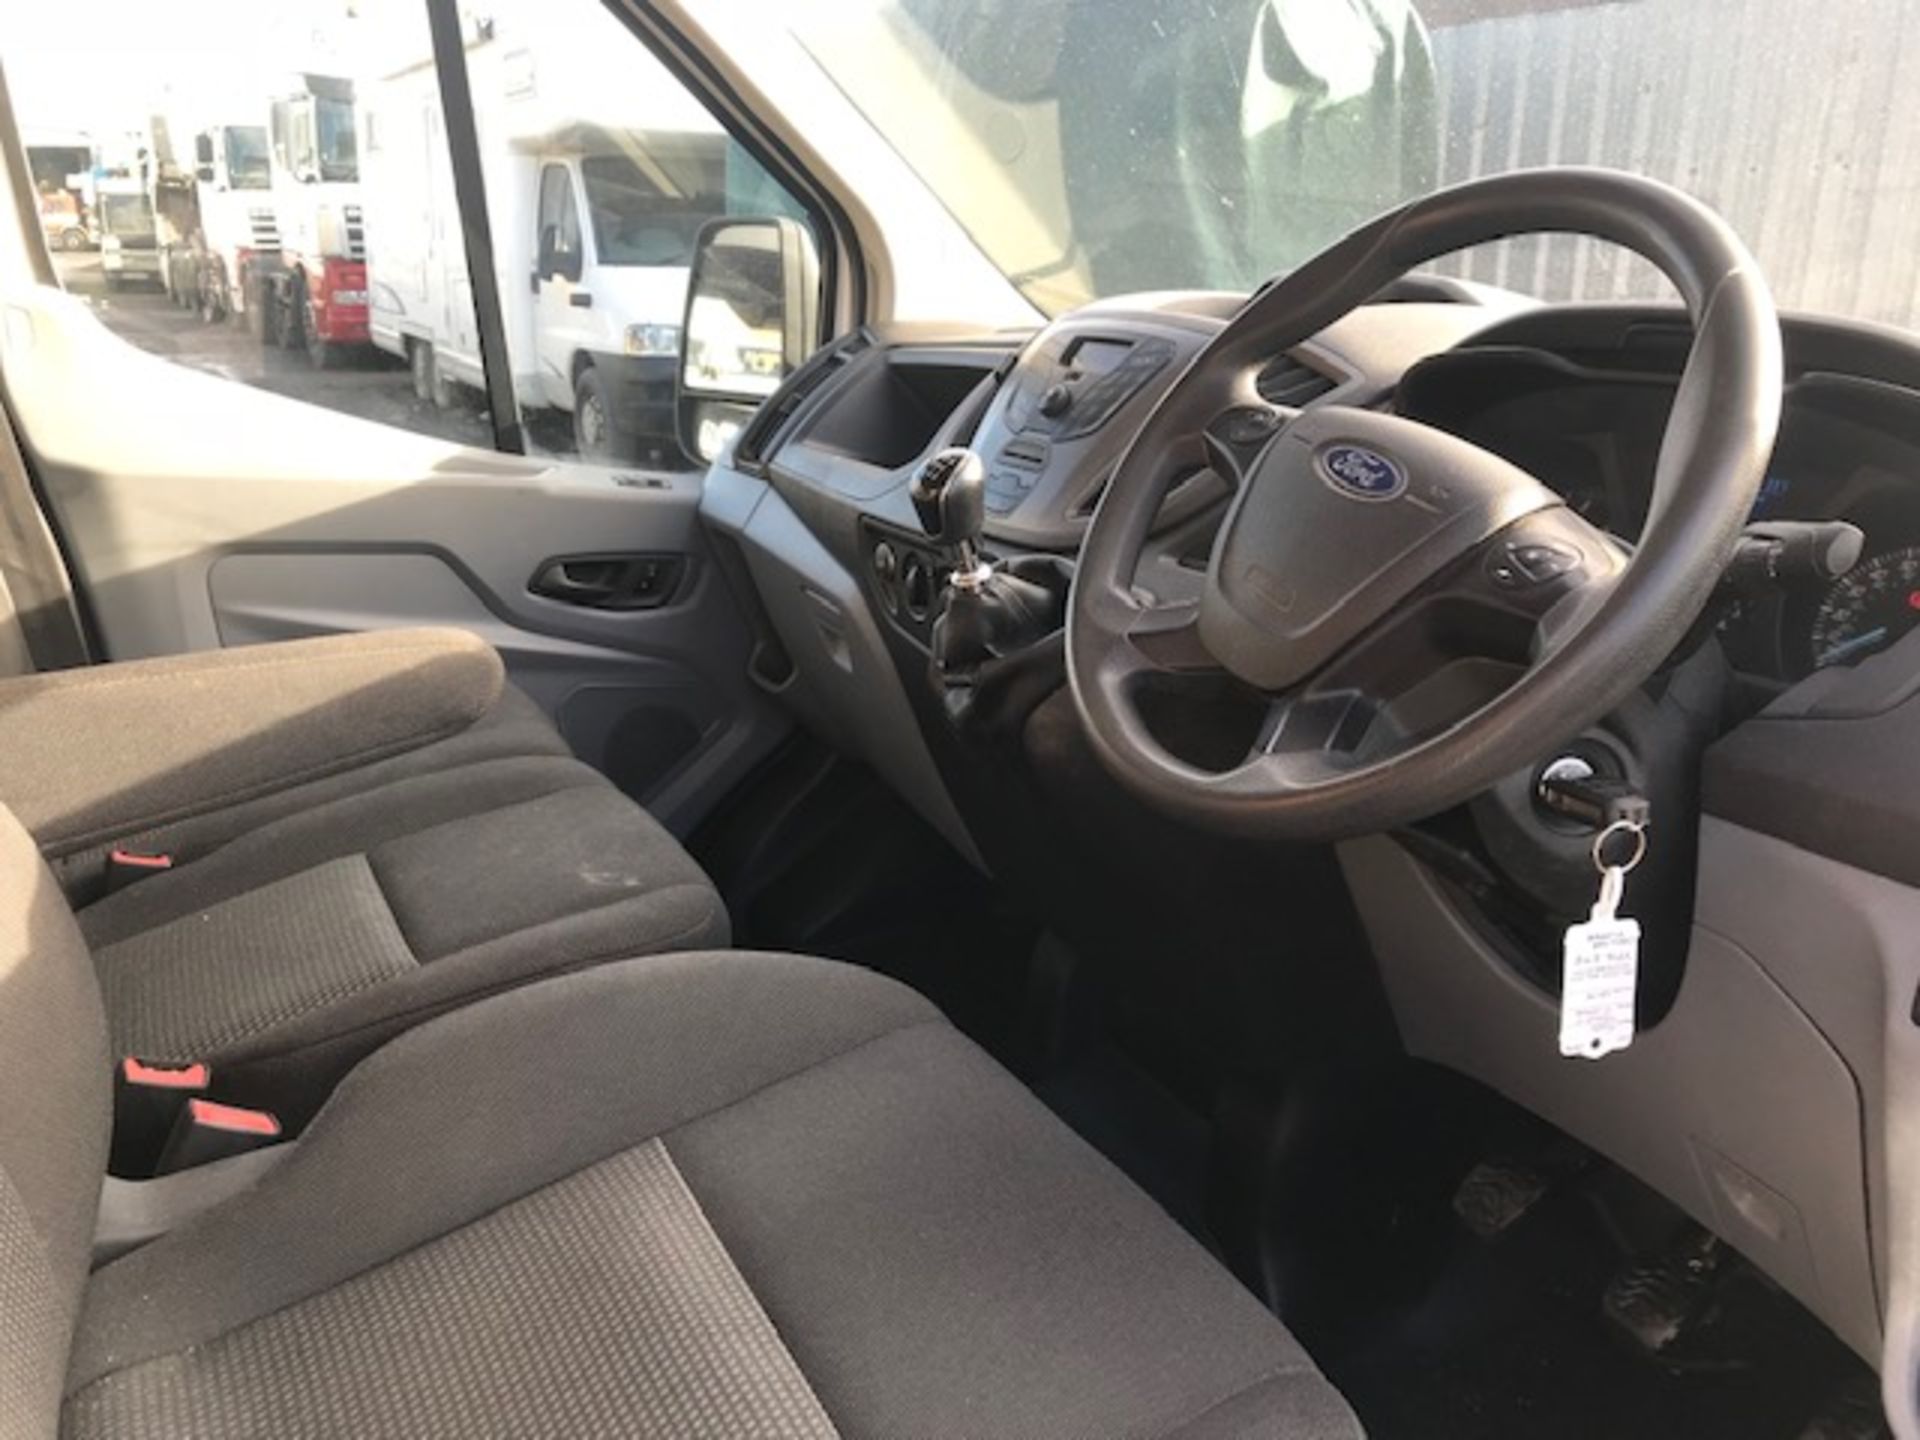 2016 Ford Transit 350 Double cab Tipper - Image 8 of 11